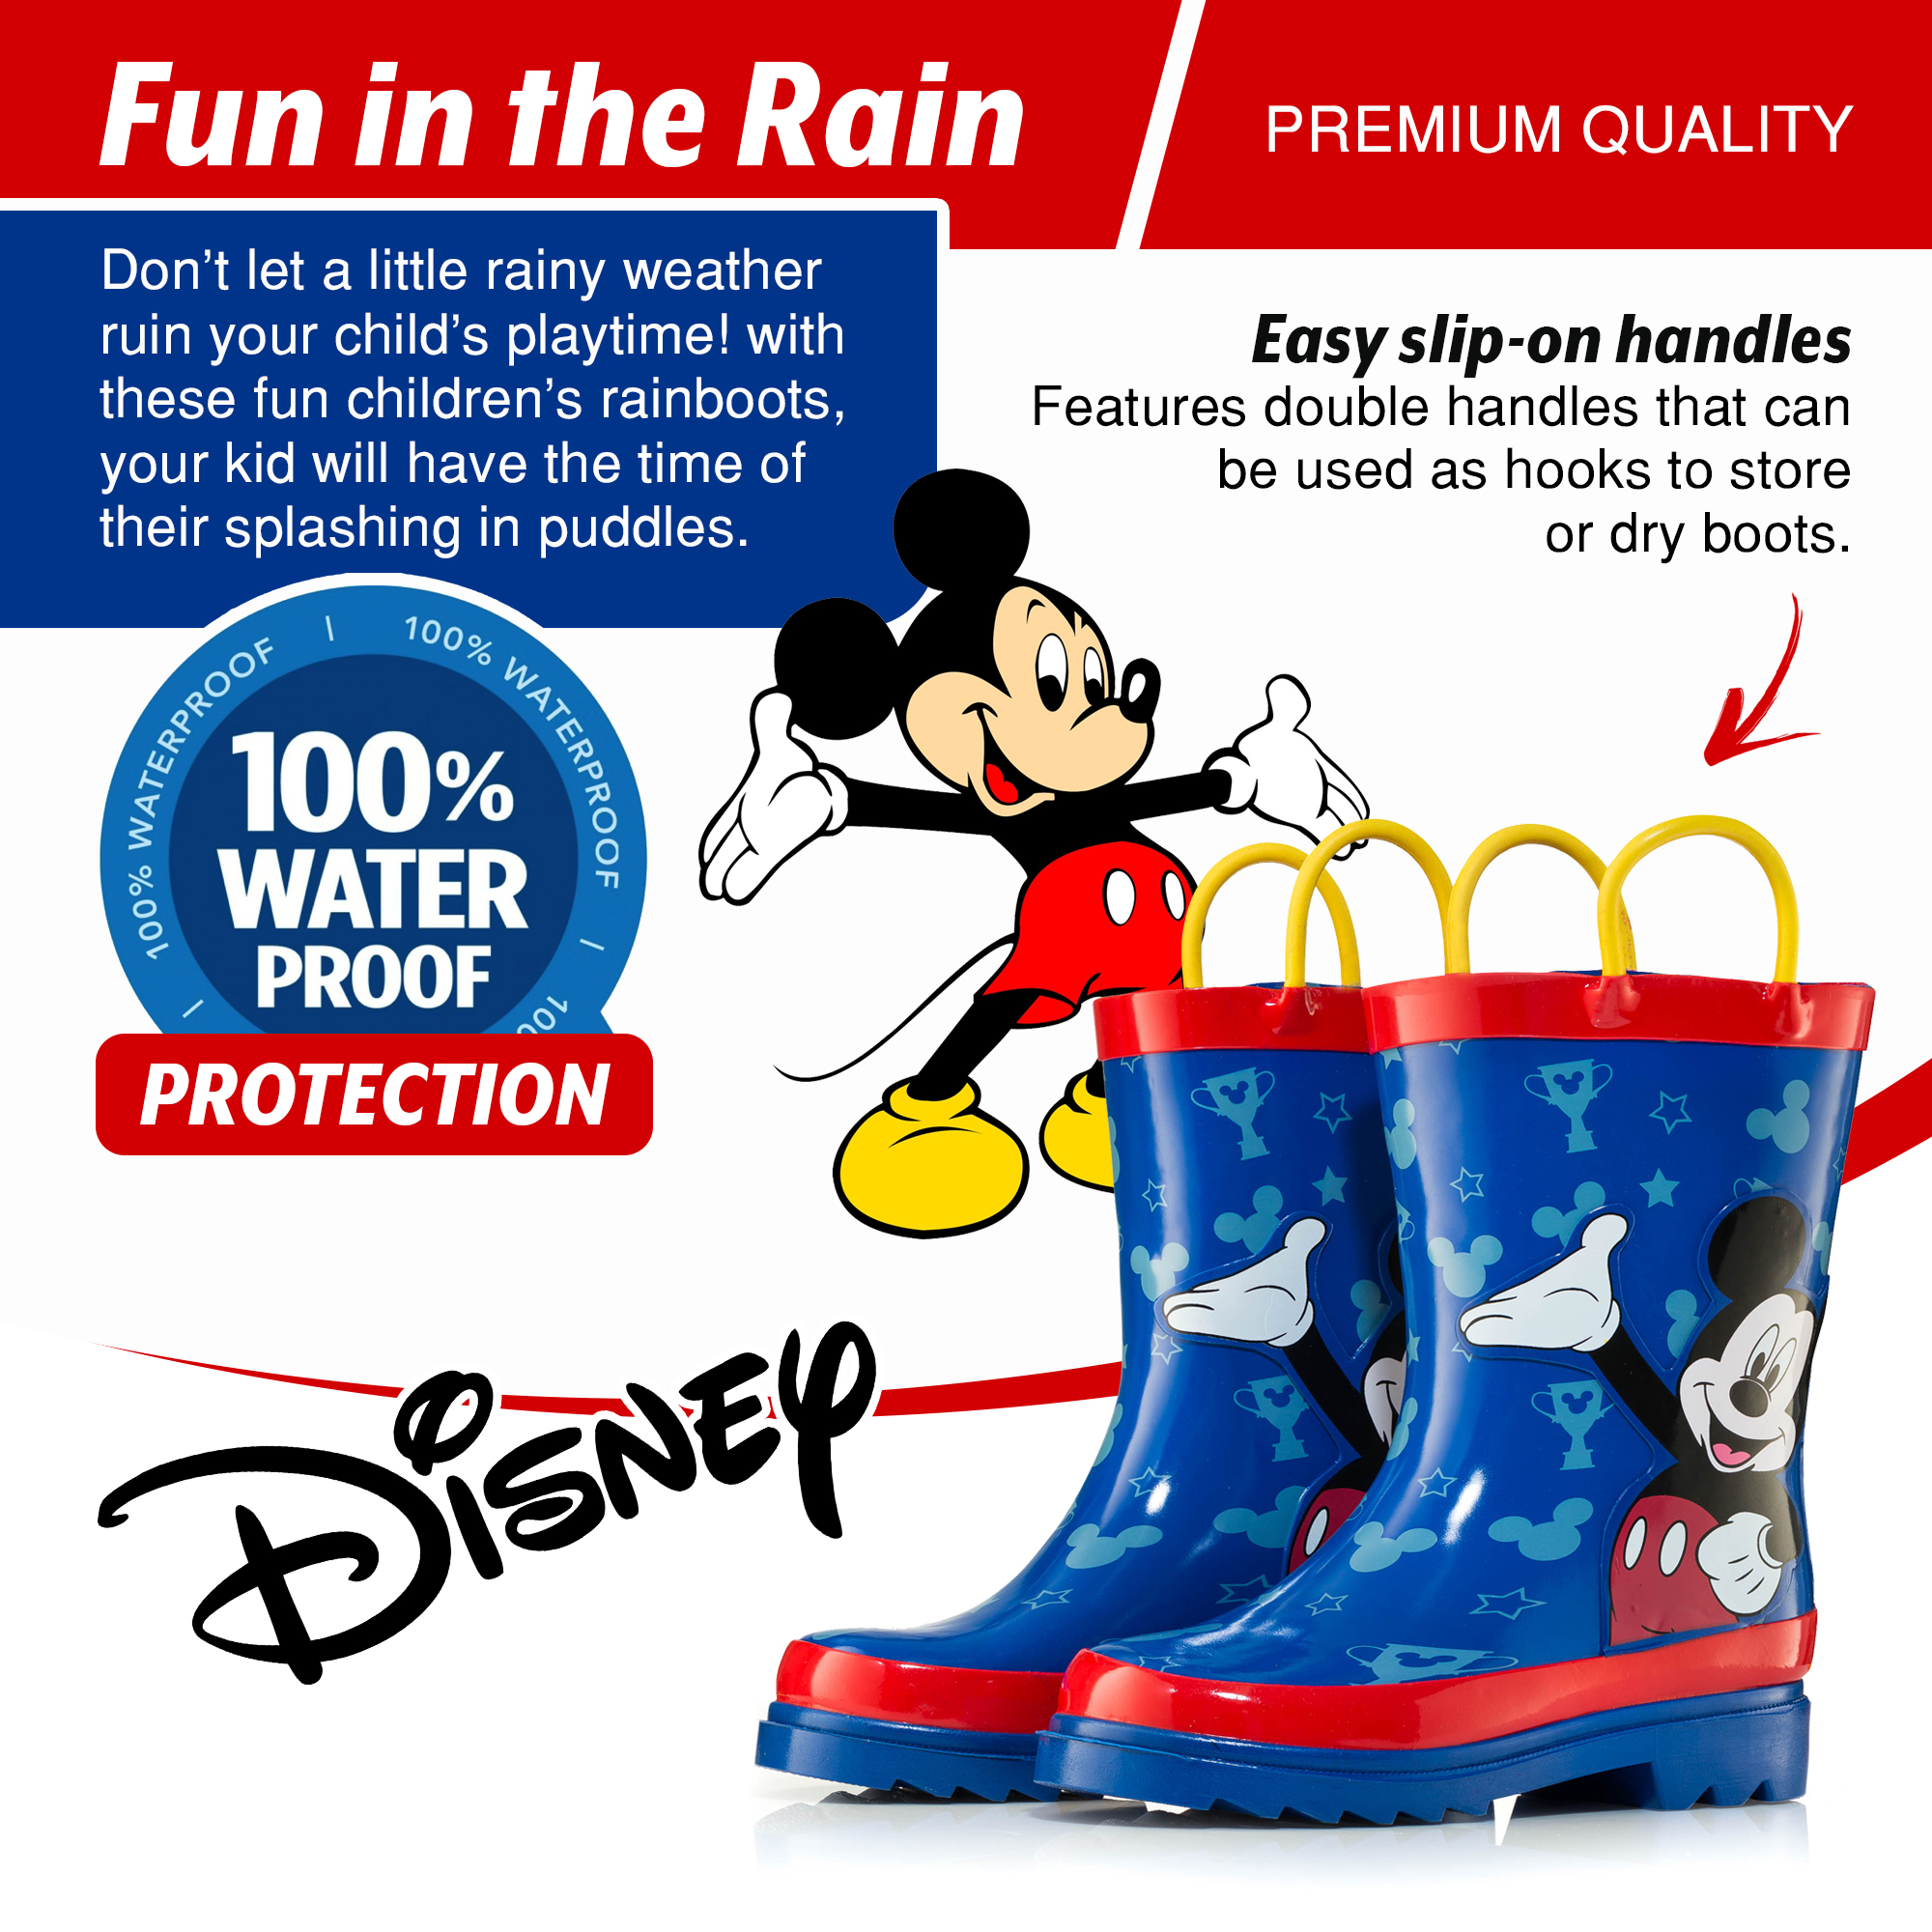 Disney Mickey Mouse Blue Rubber Rain Boots - Size 5 toddler - image 2 of 6